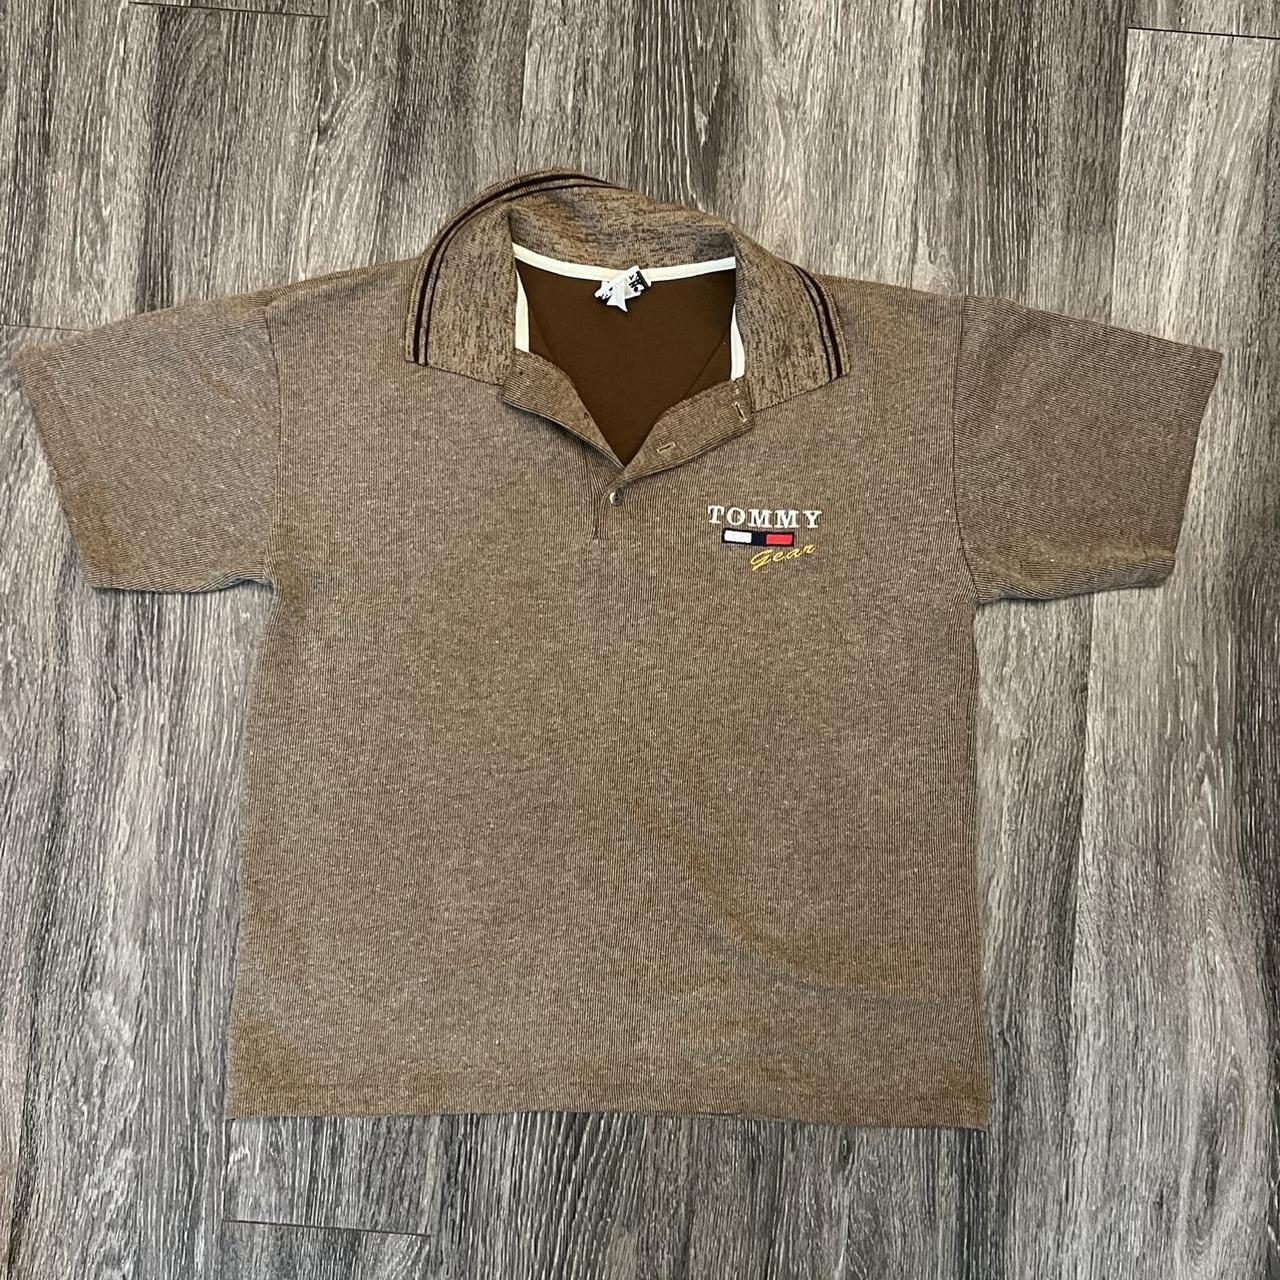 Vintage made in USA tommy gear 🥾 🦵 polo size medium... - Depop